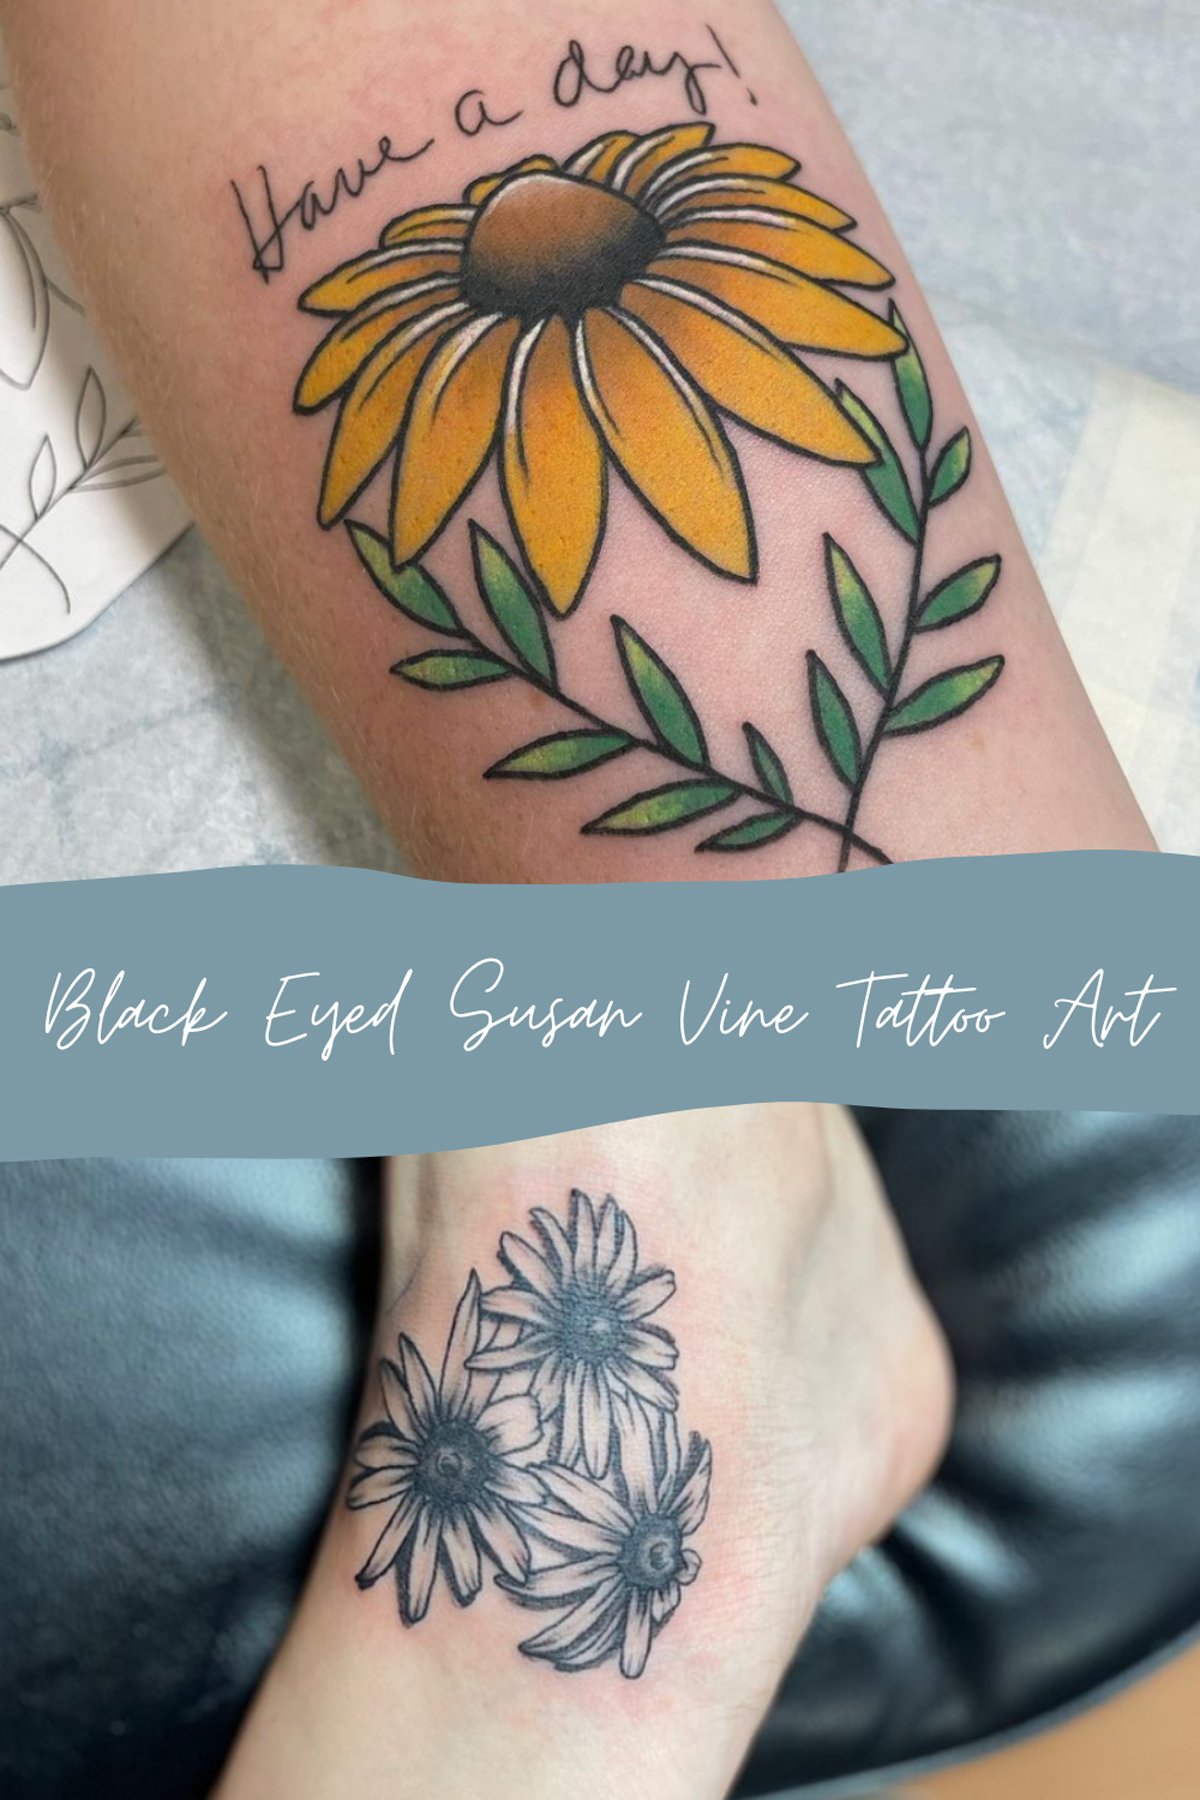 curtis loewen recommends black eyed susan tattoo designs pic